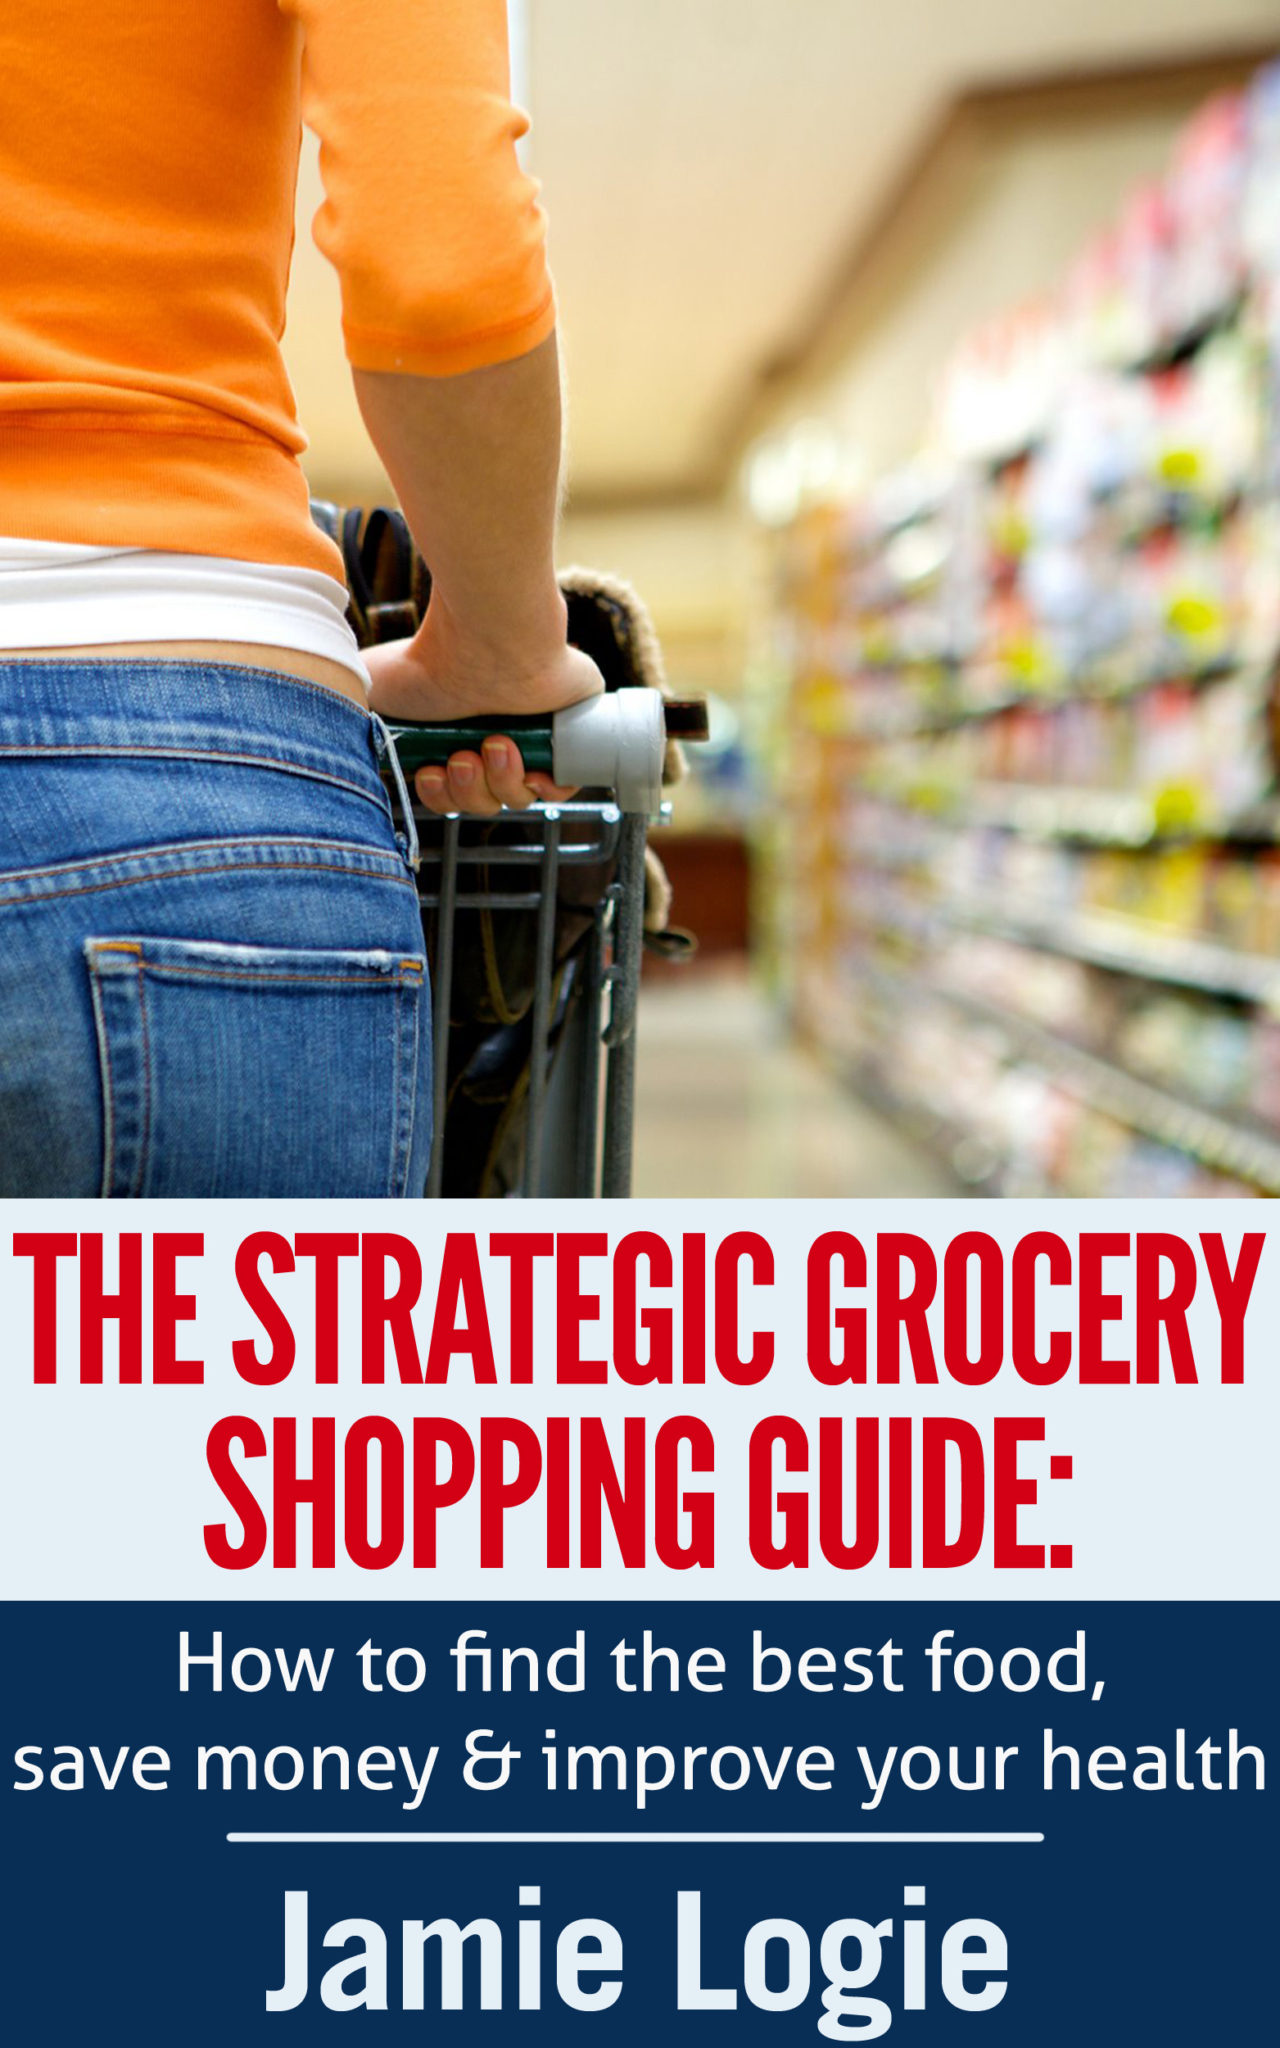 FREE: The Strategic Grocery Shopping Guide by Jamie Logie